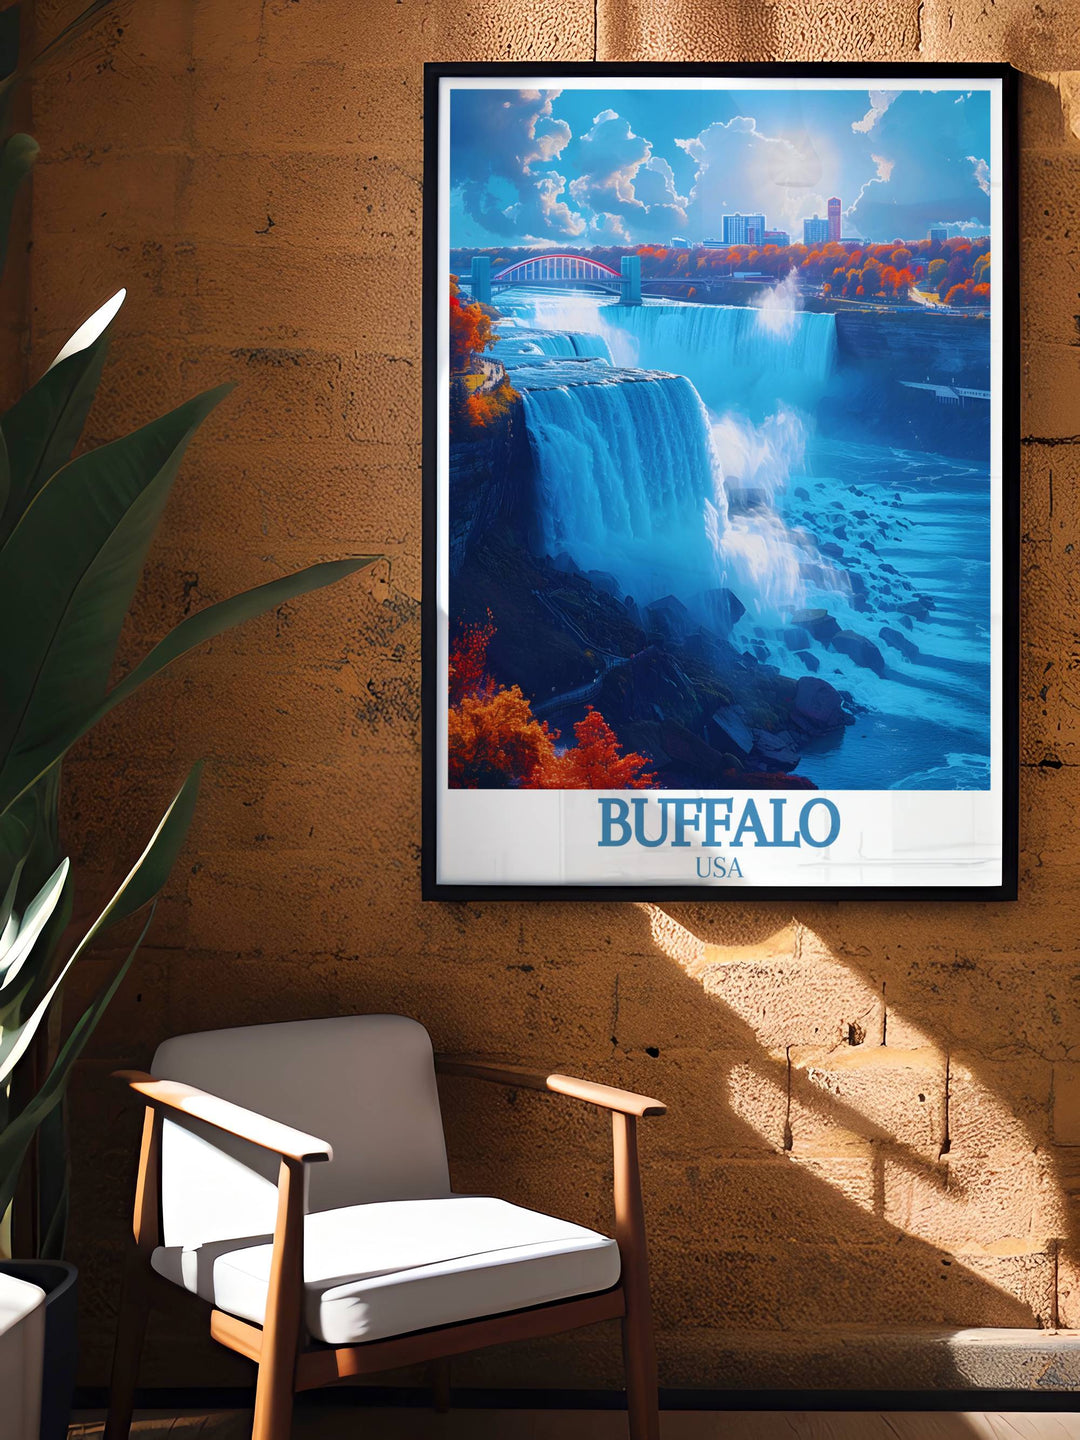 Buffalo photography digital download featuring Niangara Falls offering a convenient and high quality option for art lovers who want to bring the charm of Buffalo into their homes instantly